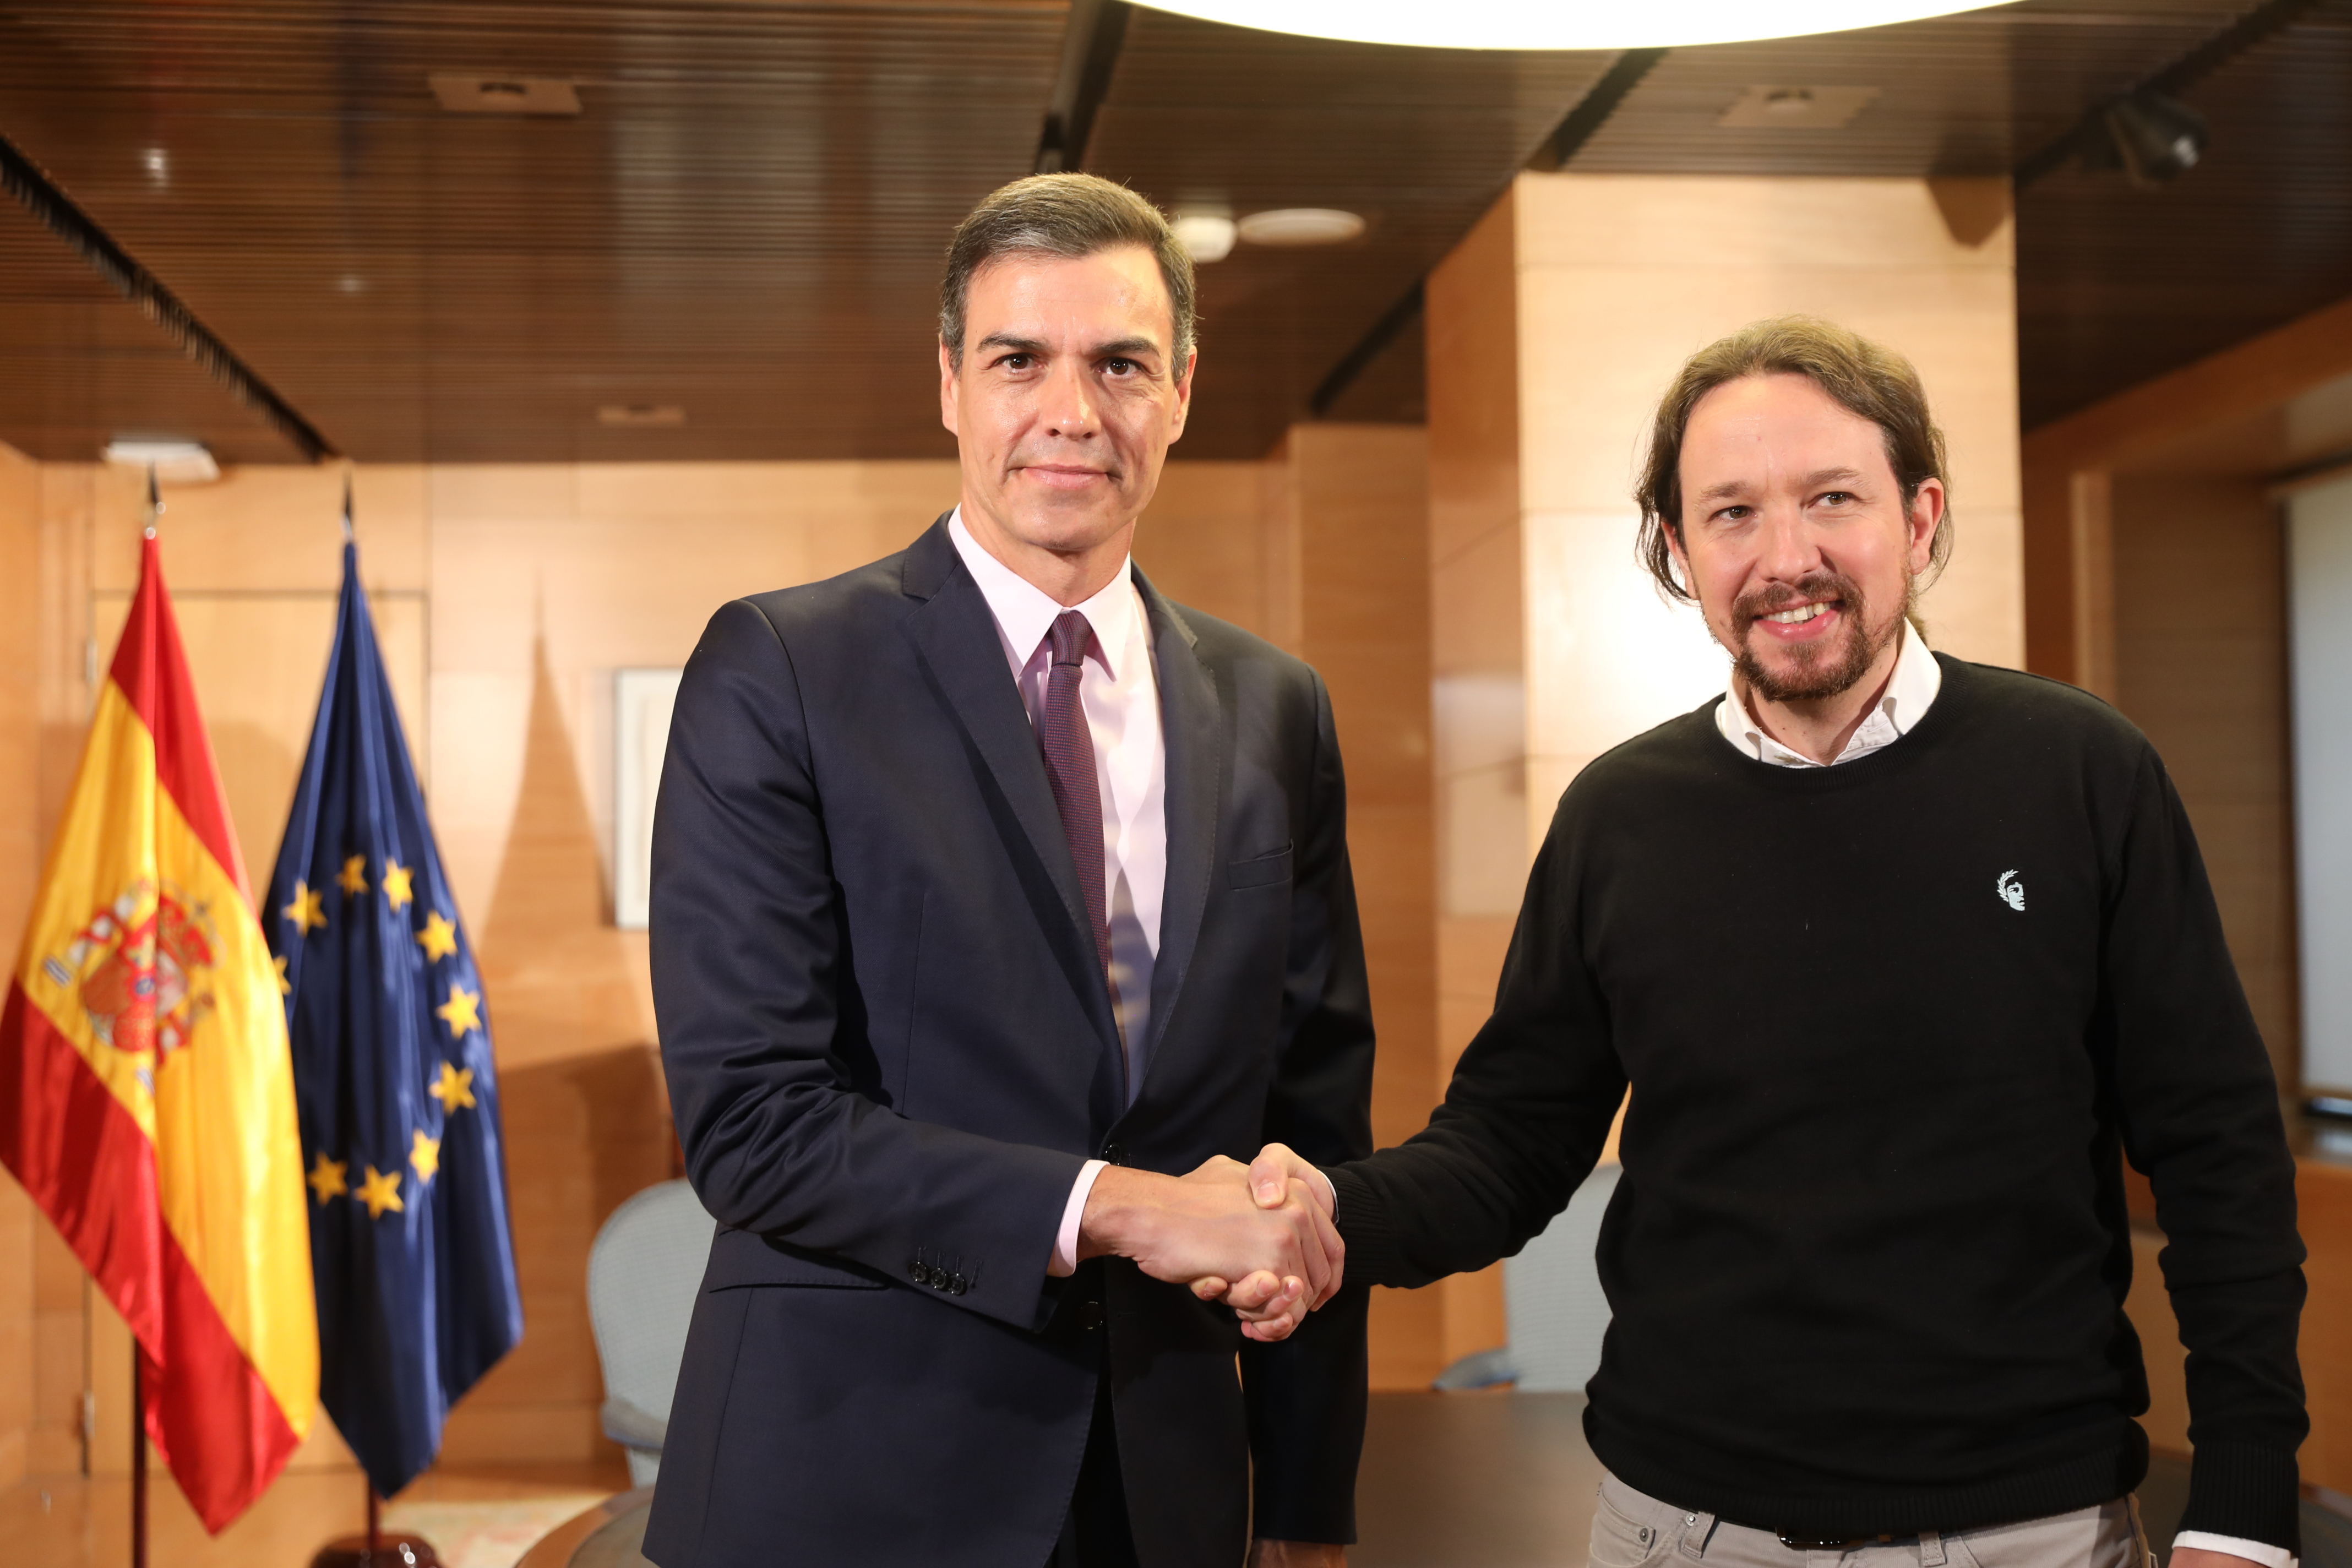 Spain's president Pedro Sánchez (left) and Podemos leader Pablo Iglesias (by PSOE)